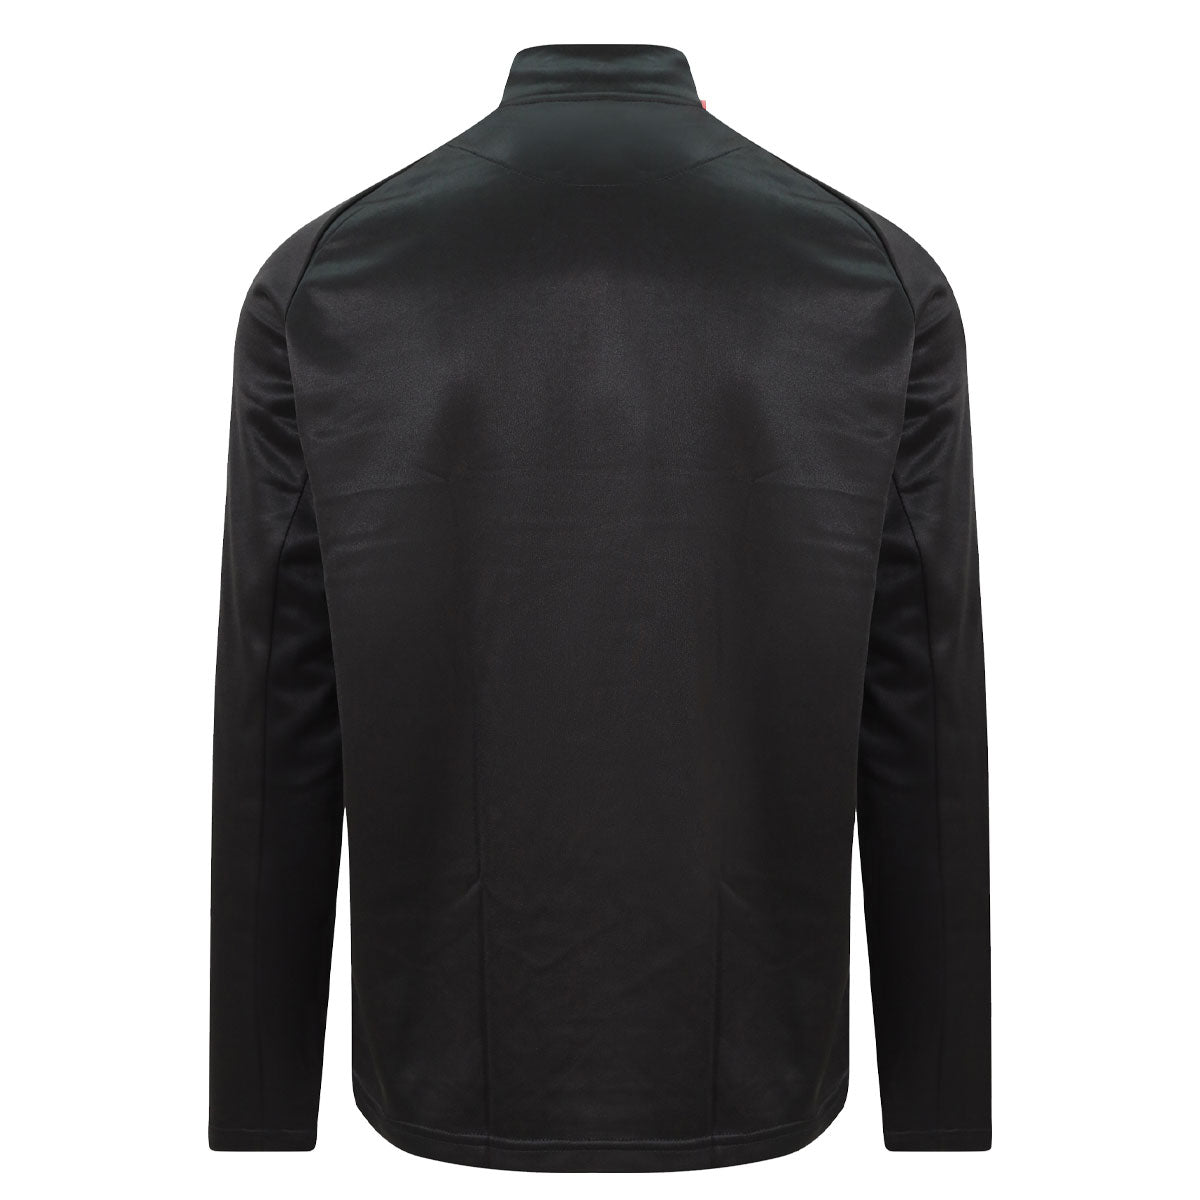 Mc Keever Ireland Supporters Core 22 Warm Top - Youth - Black